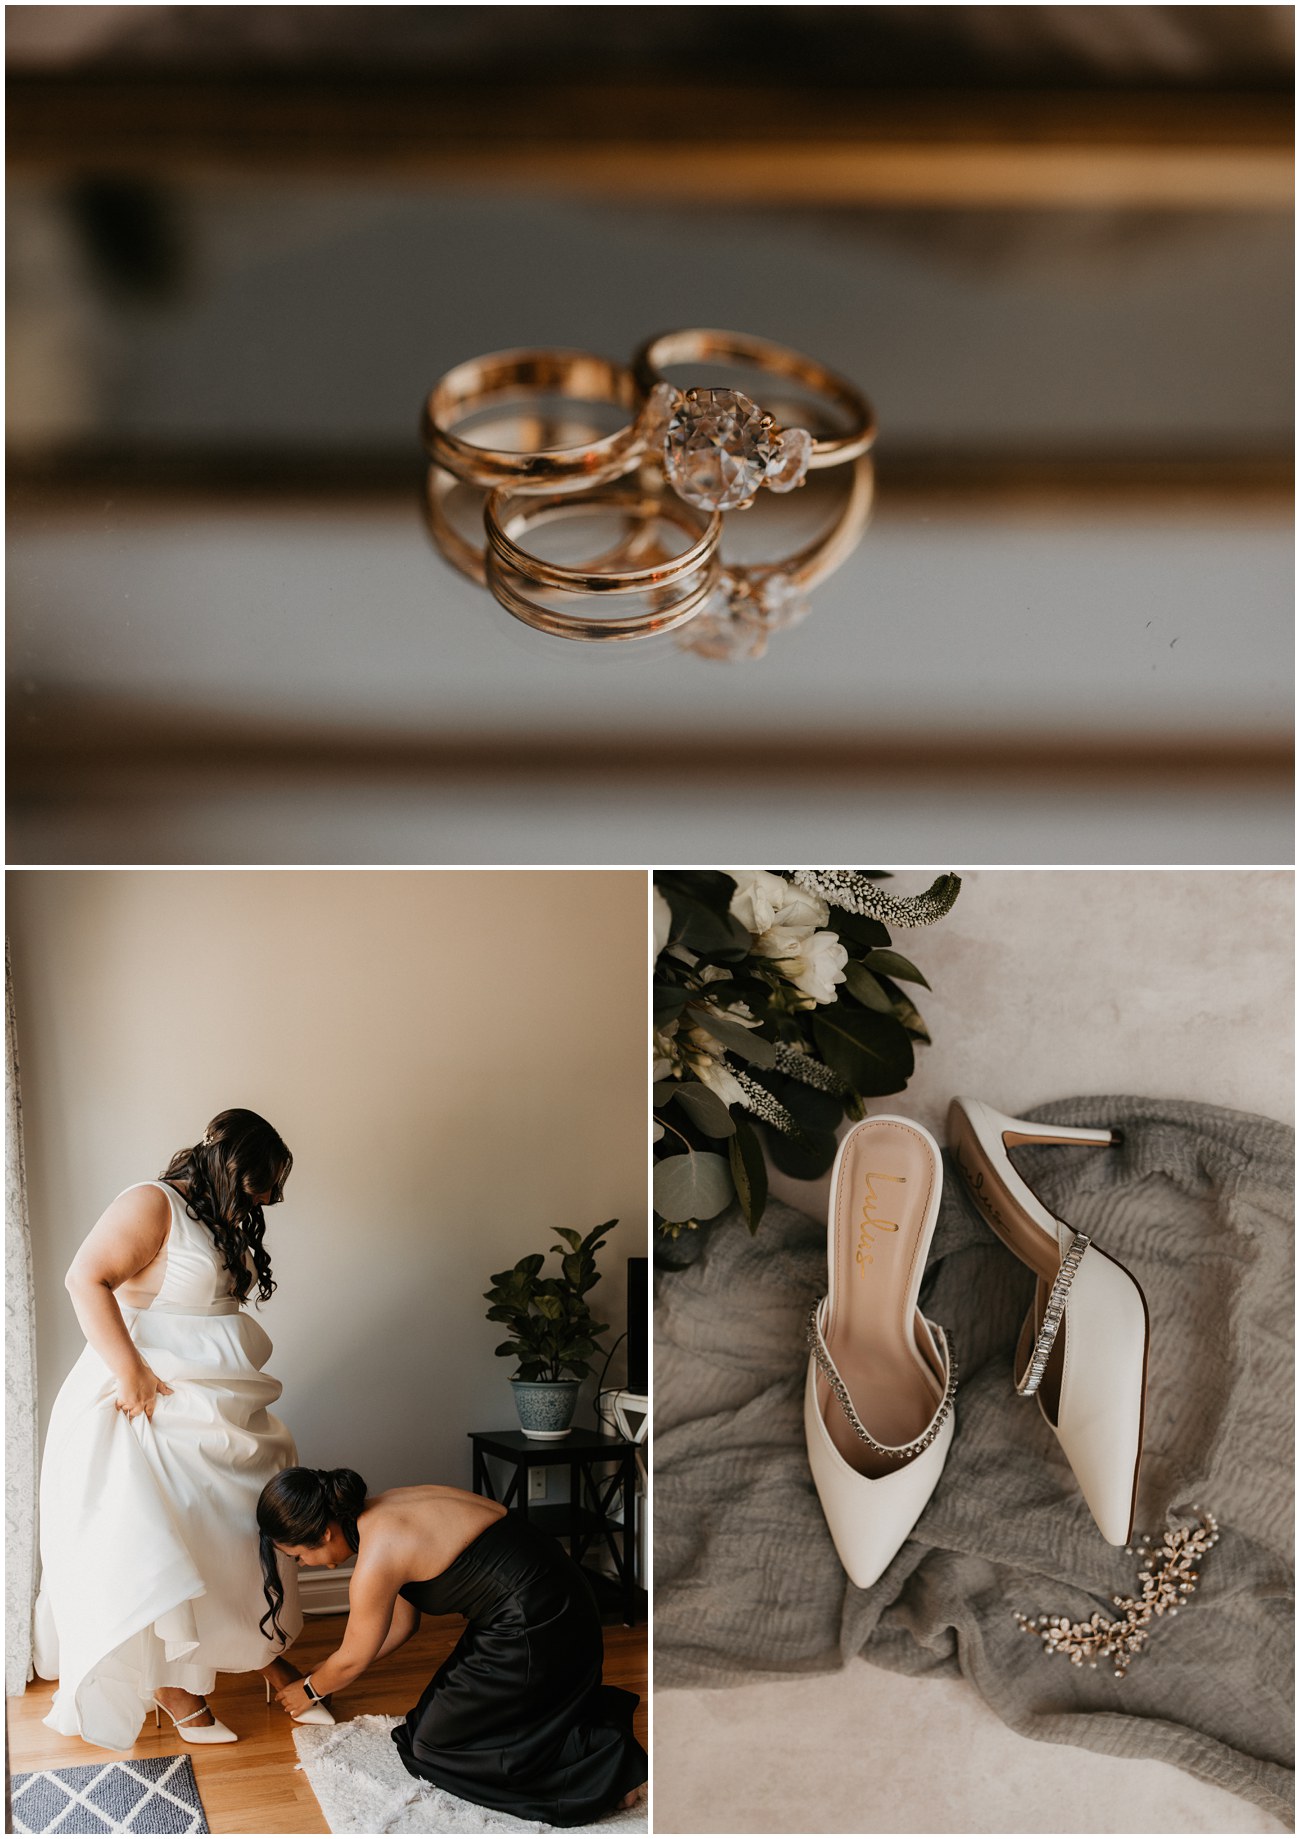 Collage of bridal details and Bride putting her shoes on